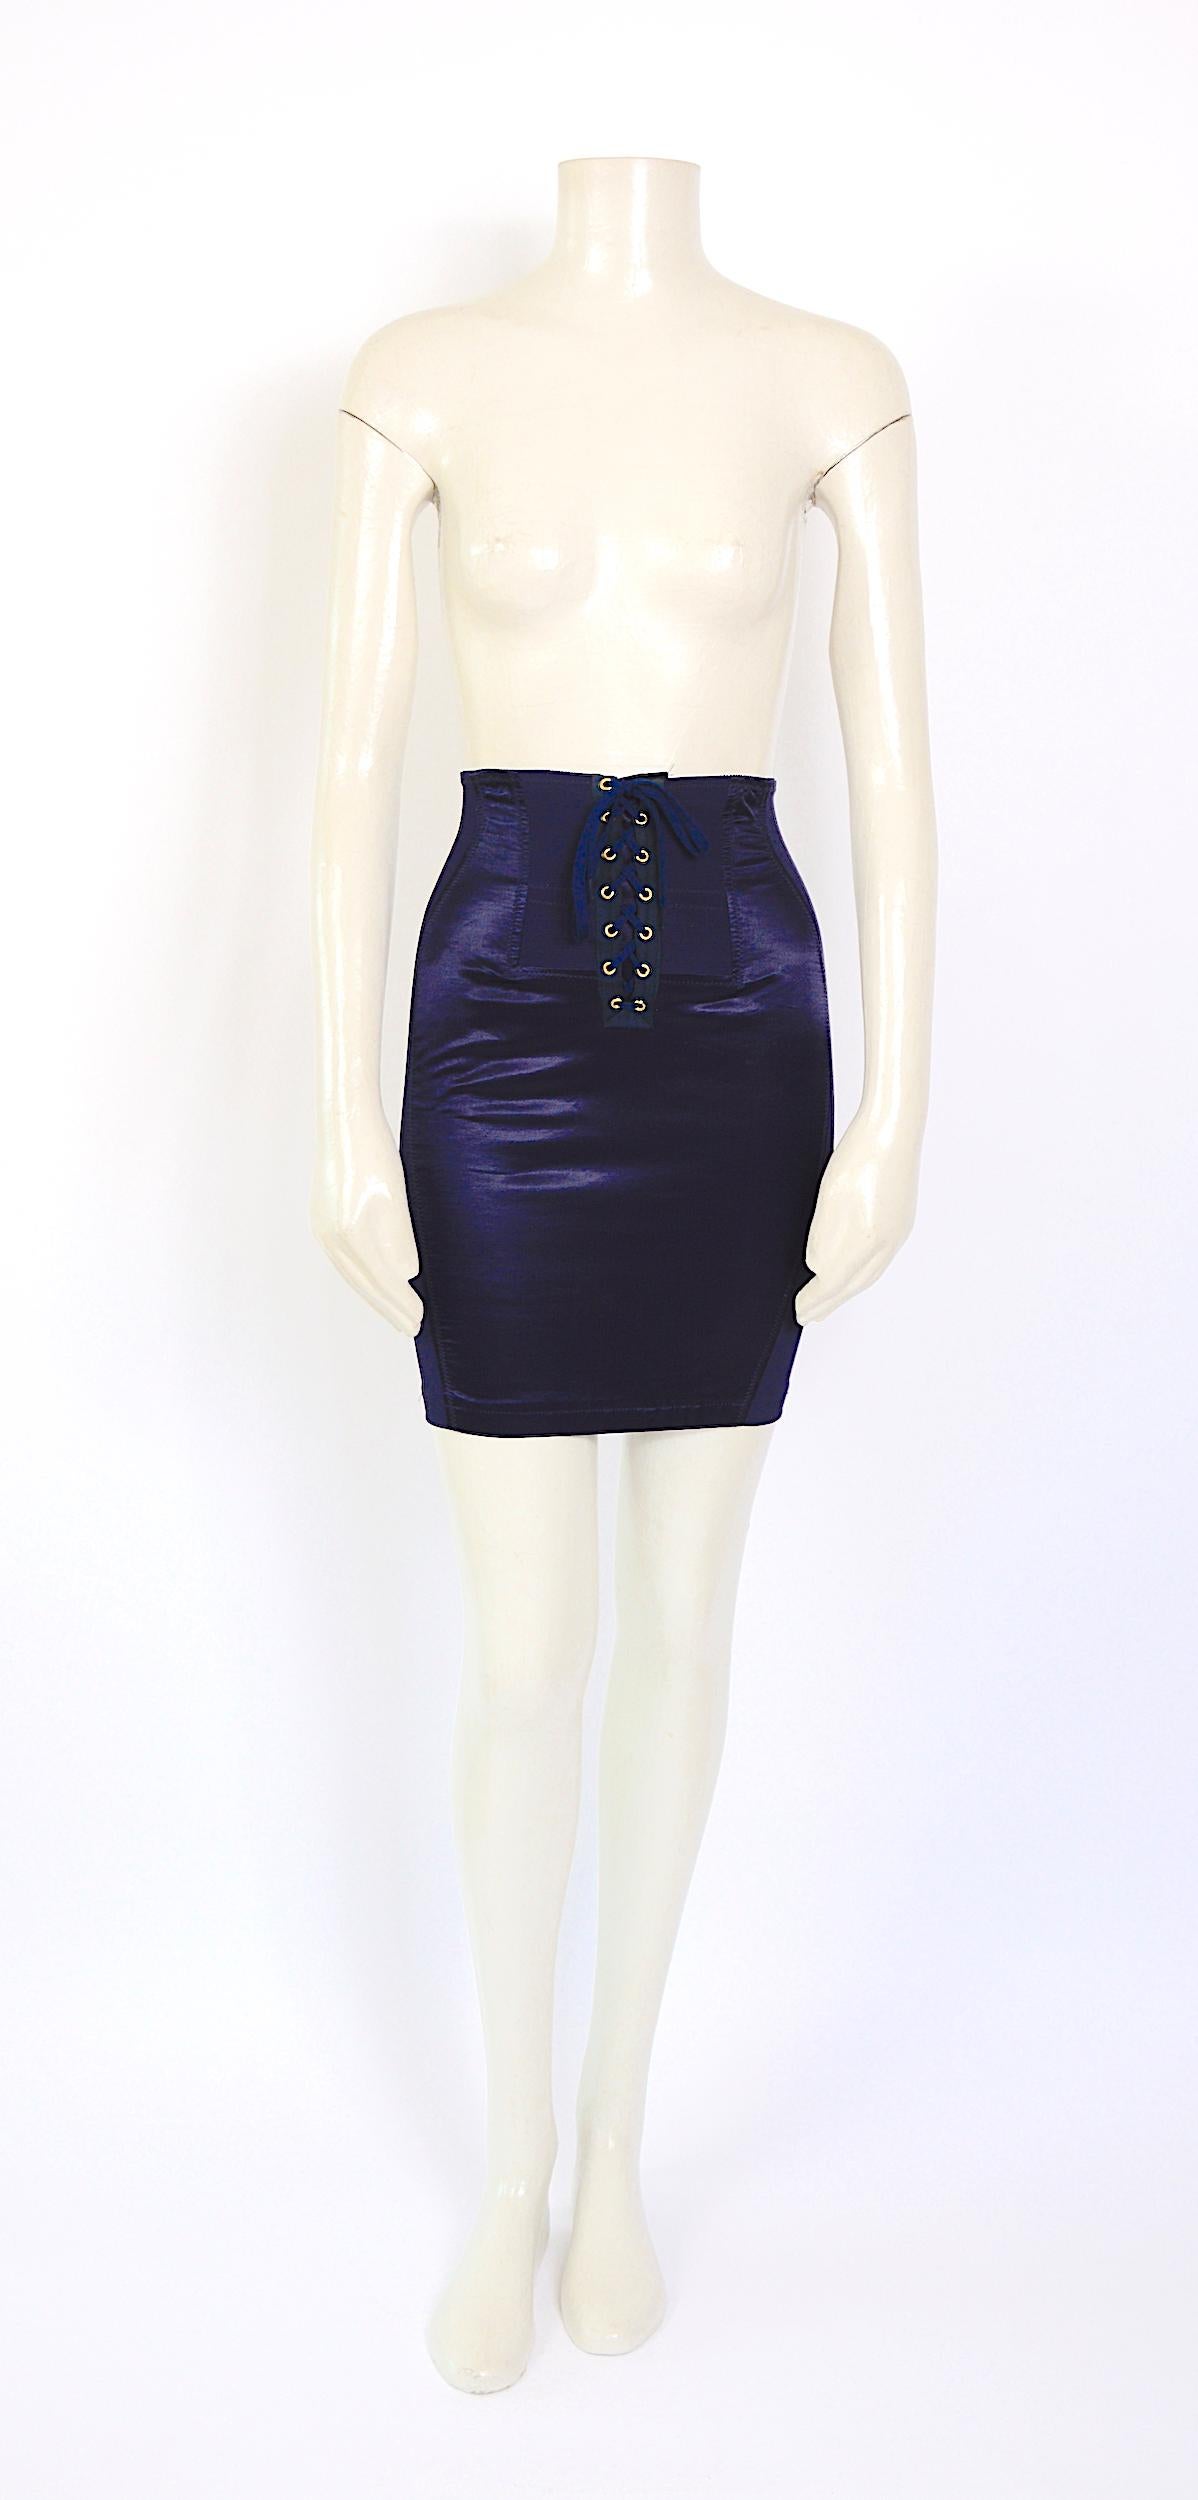 Collectible icon piece!!
Jean-Paul Gaultier vintage 1980s corset-inspired bleu spandex and satin skirt.
Beautiful vintage condition, the rubber elasticized panels allowing side stretch on the side included. 
Material: cotton-viscose- polyamide
Made